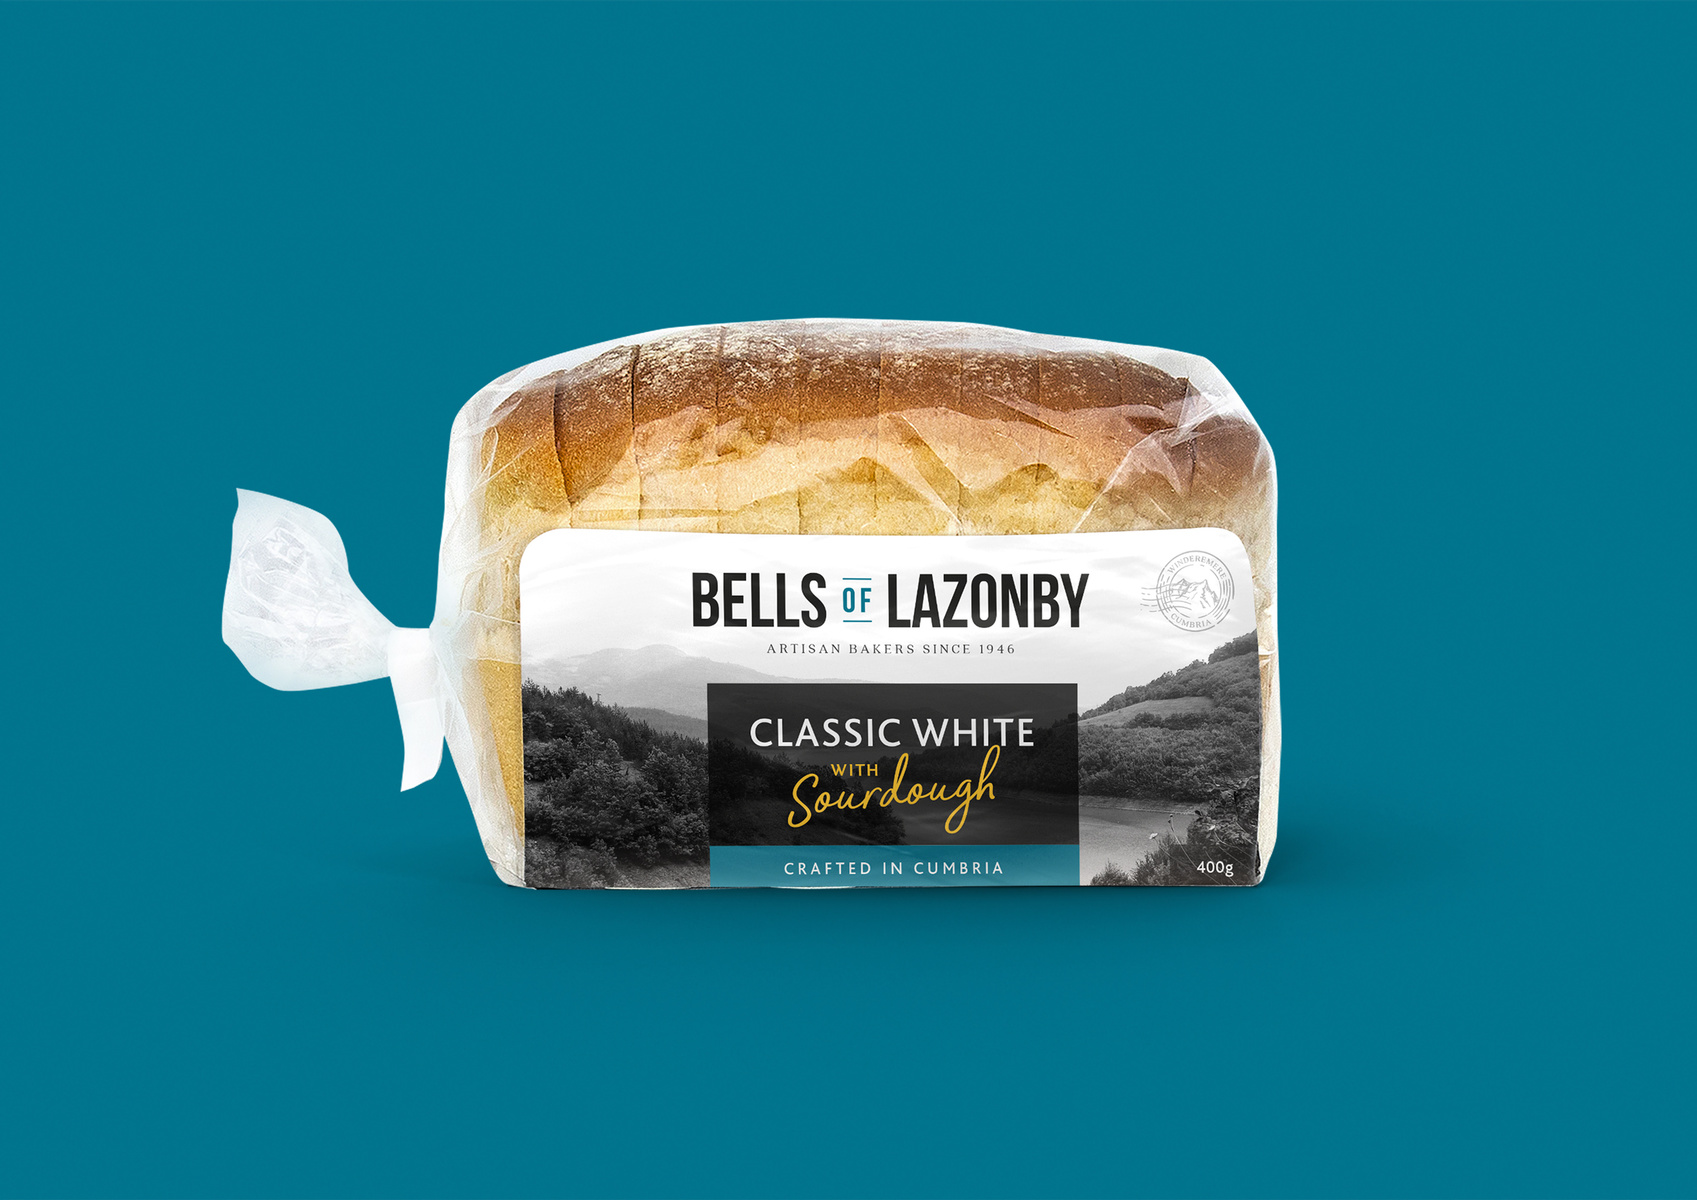 Double D Creative Creates a Fresh New Look for Bells of Lazonby Craft Bread